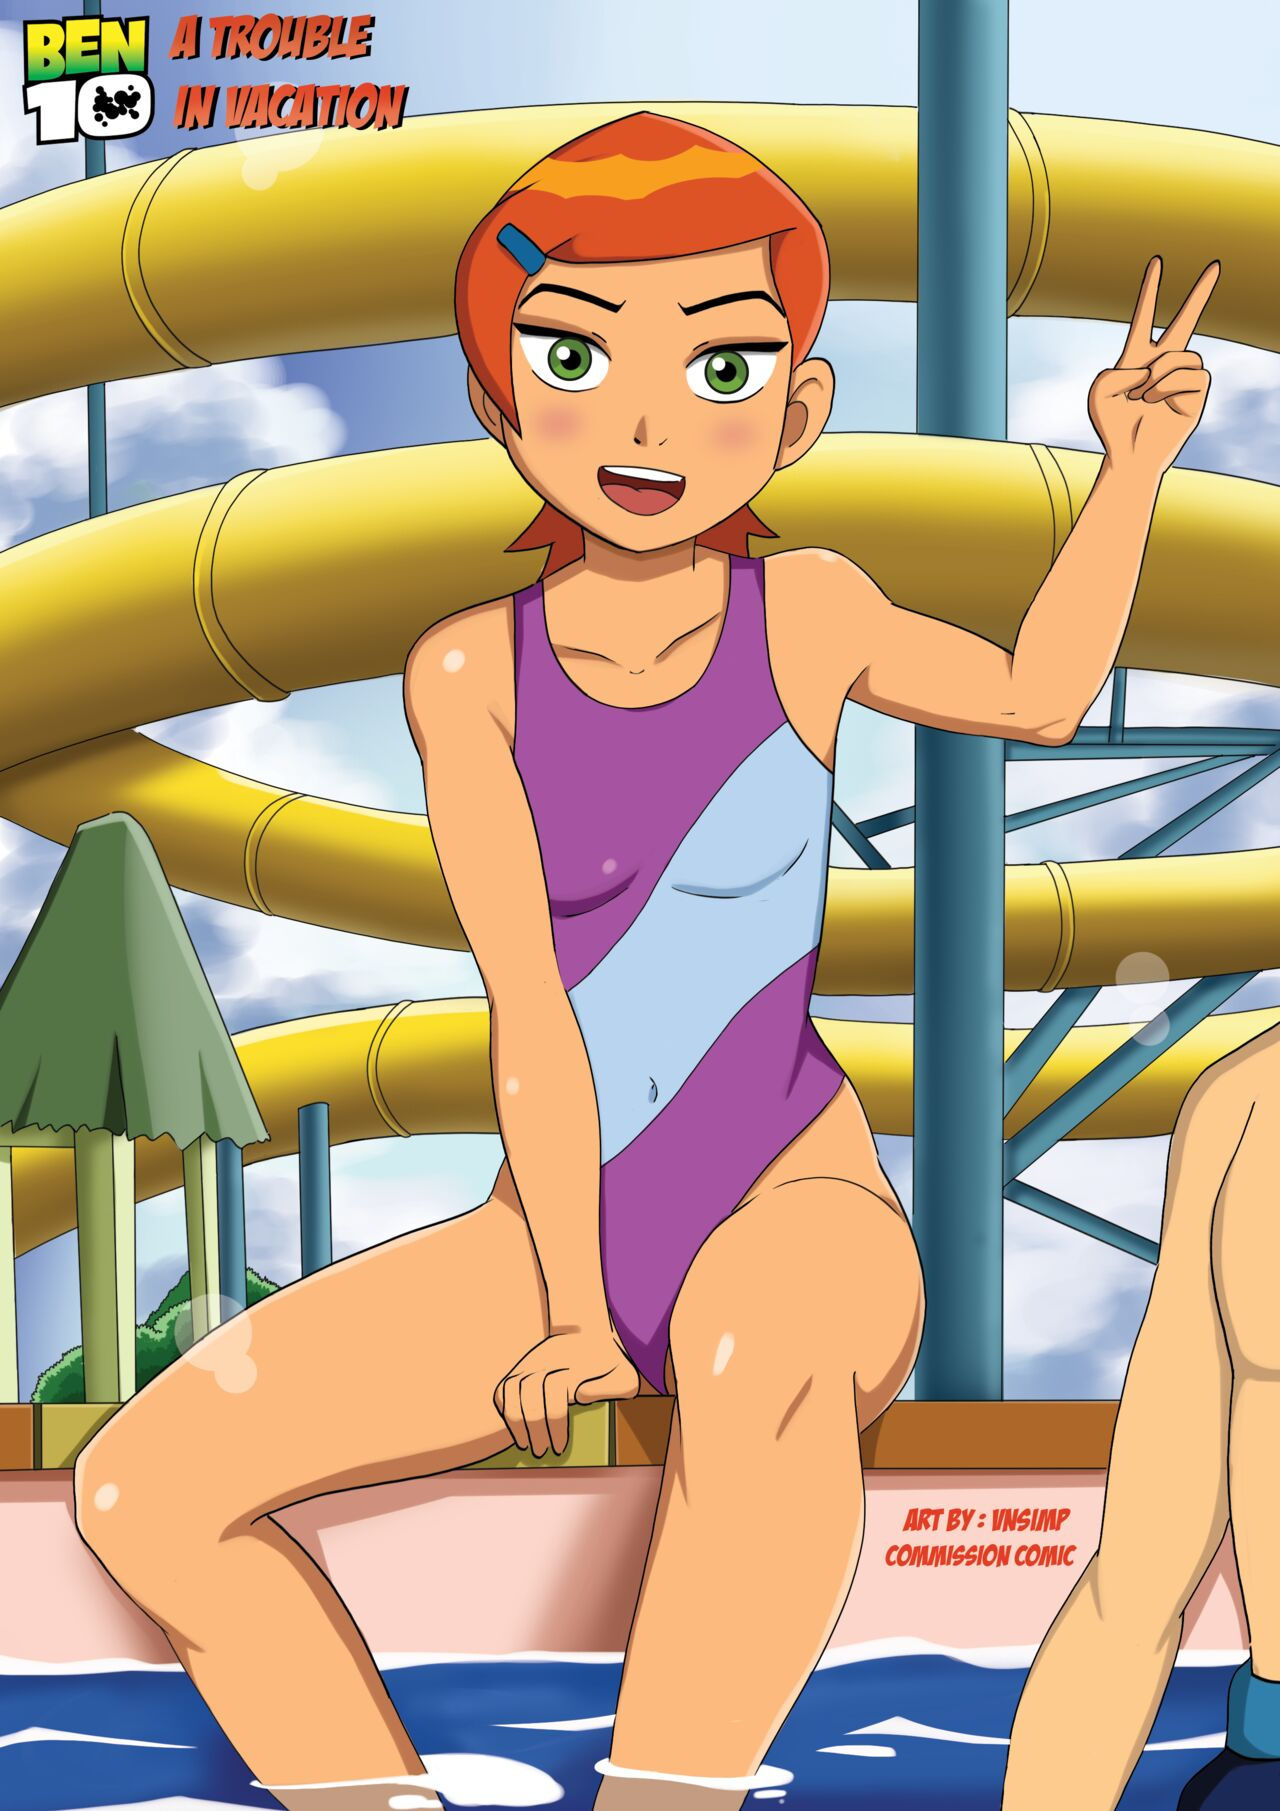 Ben 10 – A Trouble In Vacation